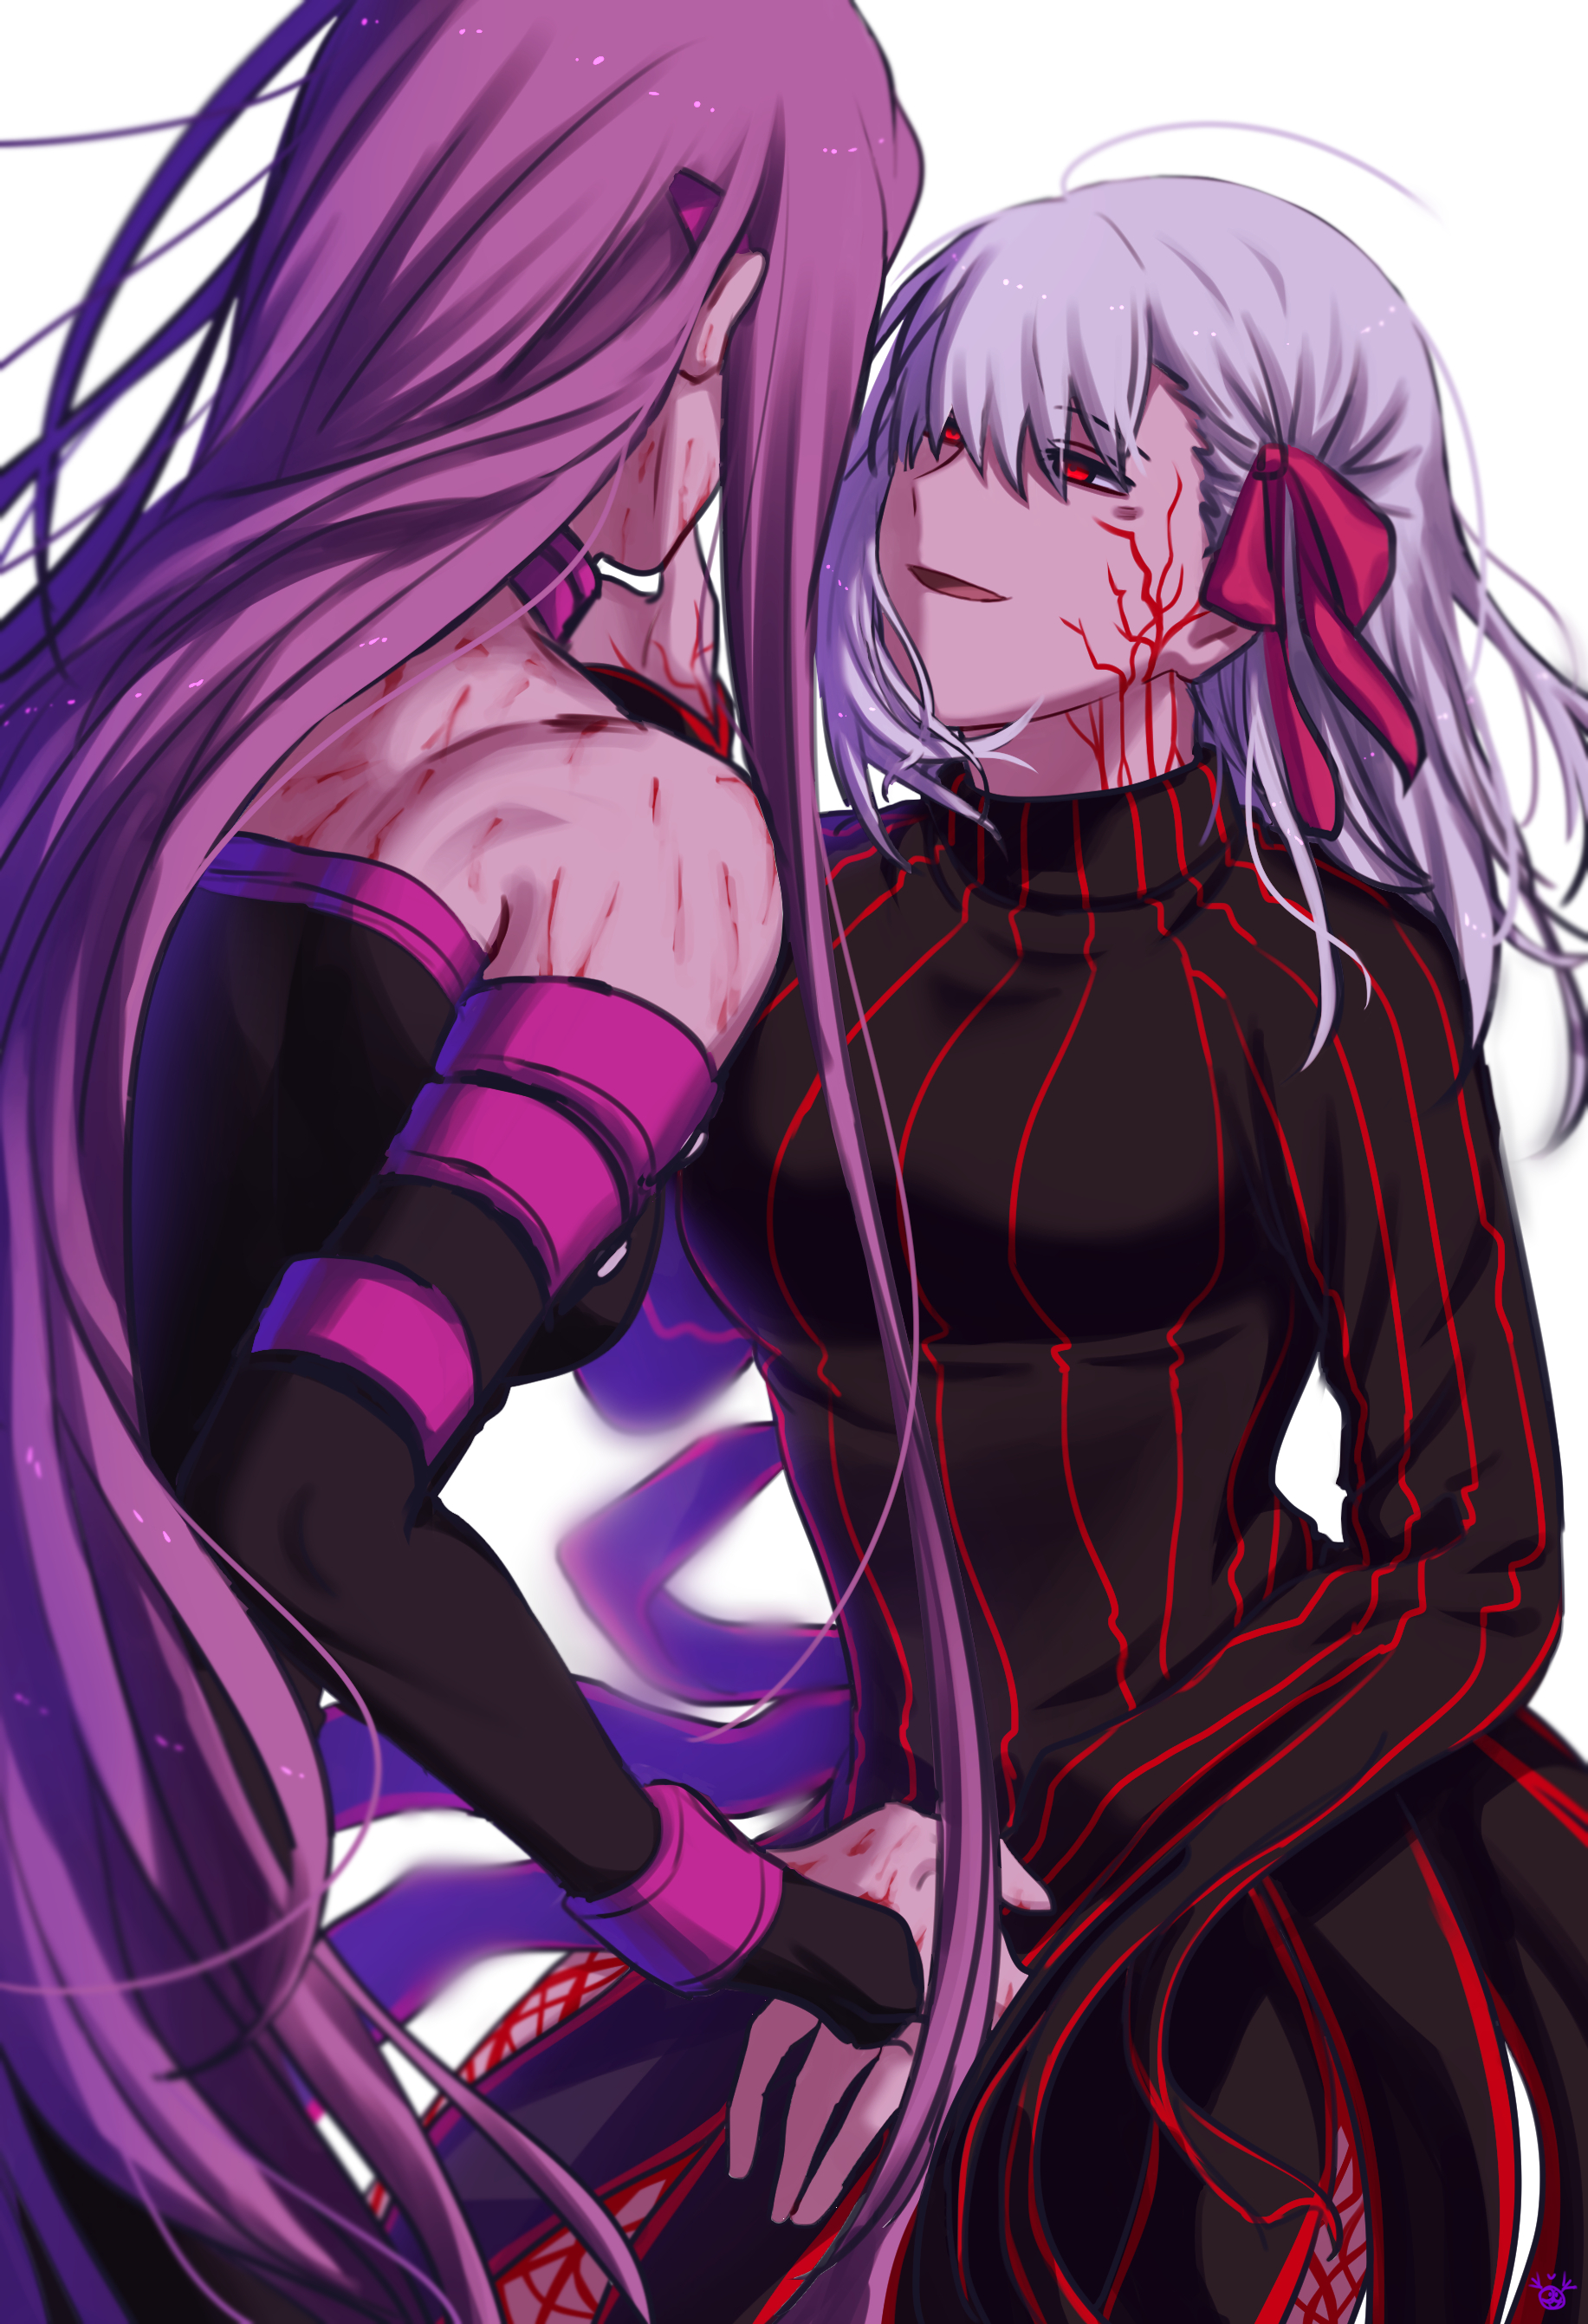 Anime 1833x2682 Fate series Fate/Stay Night fate/stay night: heaven's feel anime girls female warrior no bra black dress holding hands long hair purple hair bare shoulders hand on face portrait display smiling open mouth anime 2D Rider (Fate/Stay Night) hair in face red eyes simple background curvy sideboob fan art Matou Sakura inked girls open dress red ribbon big boobs